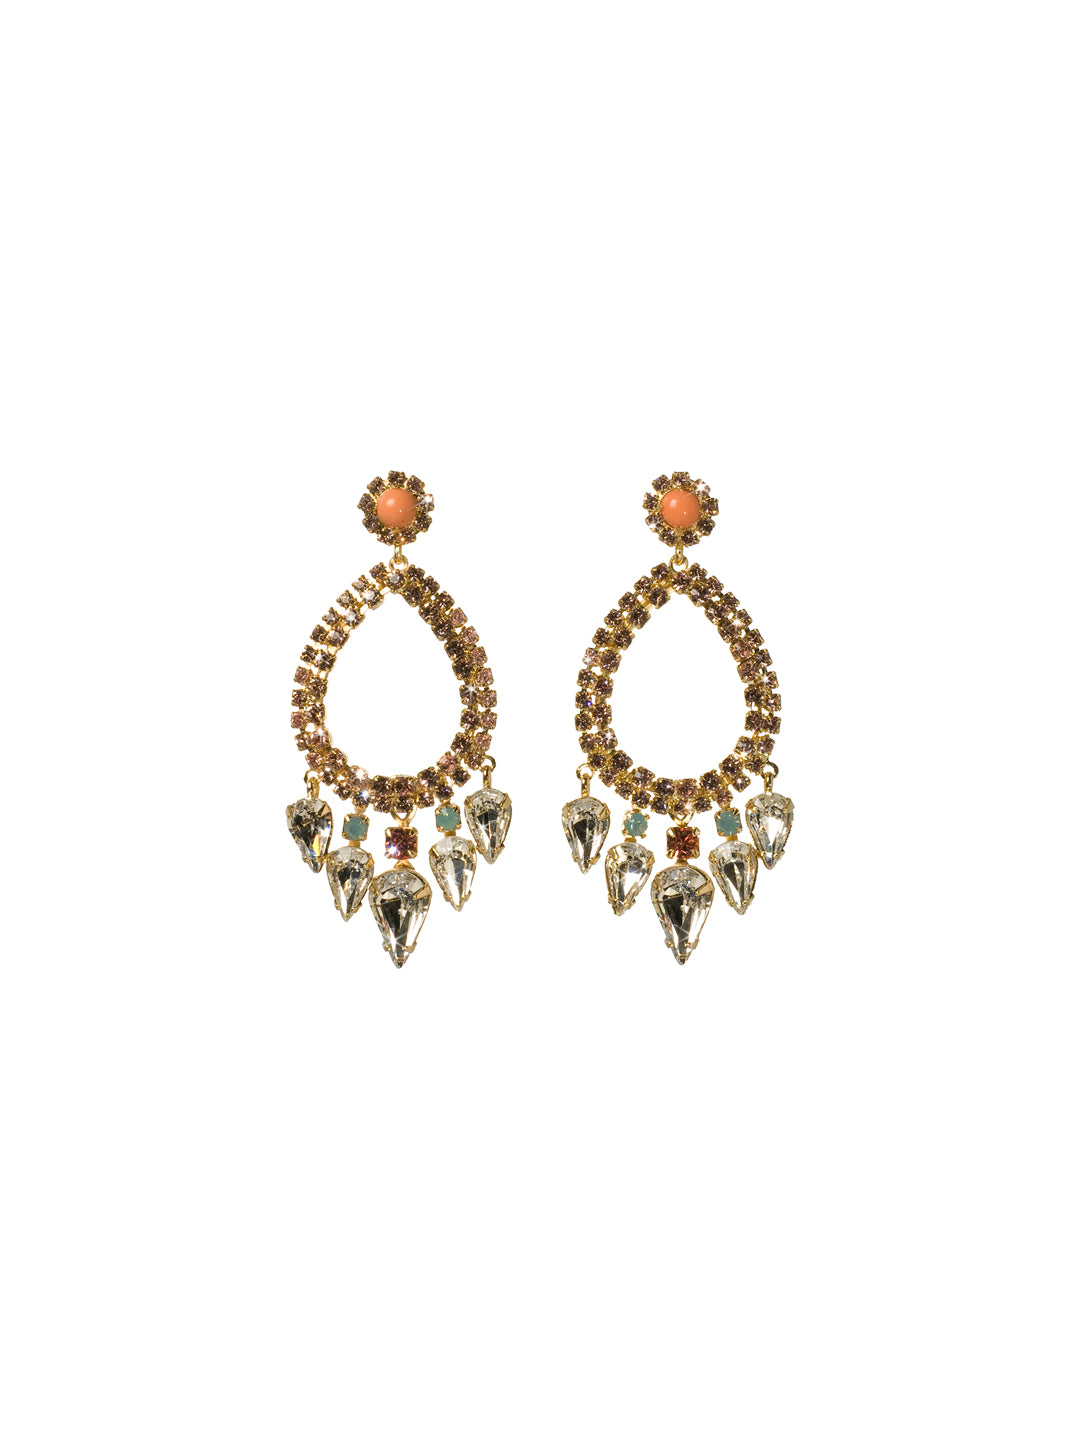 Outlined Teardrop Statement Earrings - ECU21BGCOR - From a floral inspired post hangs a delicate pear shaped outline of crystals. Small teardrop shaped crystals hang from the bottom creating a shimmering chandelier look. From Sorrelli's Coral Reef collection in our Bright Gold-tone finish.